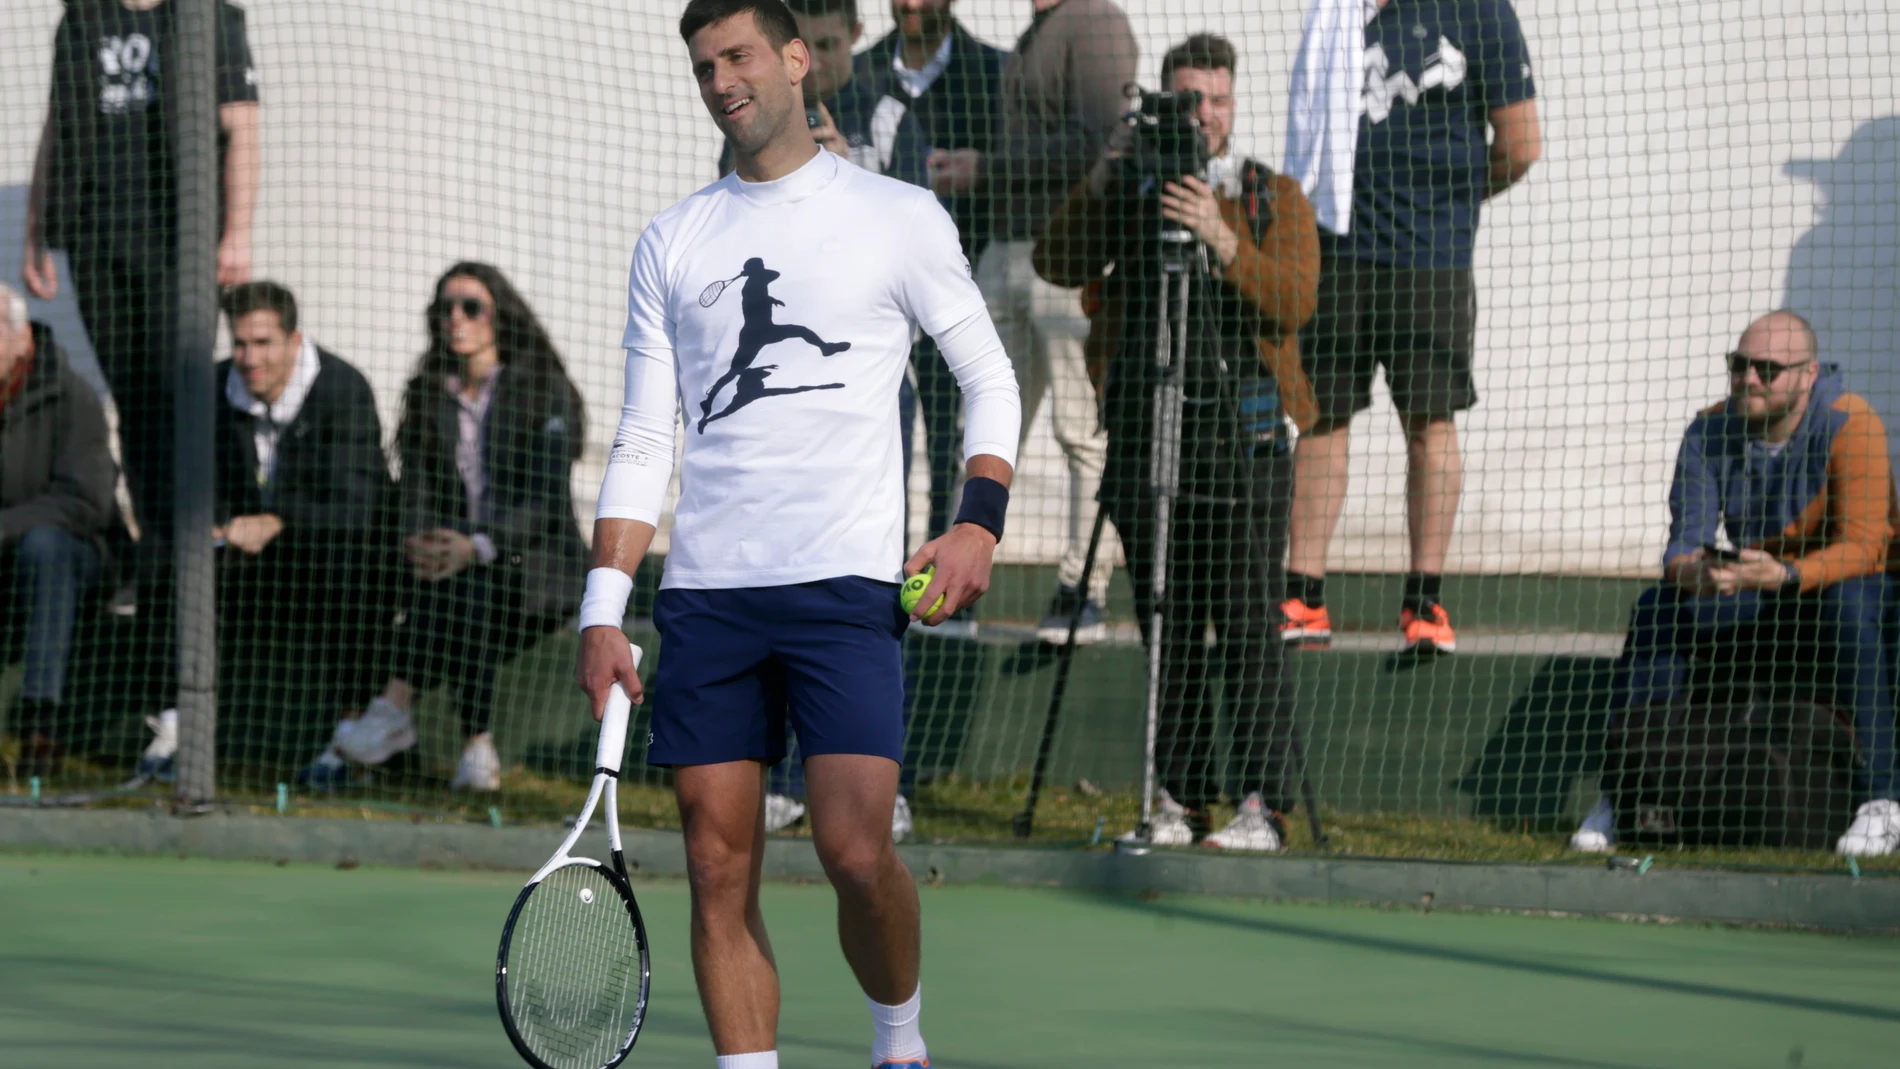 Belgrade (Serbia), 22/02/2023.- Serbian tennis player Novak Djokovic reacts during a training session in Belgrade, Serbia, 22 February 2023. Djokovic held a press conference in his home town on the plans for the rest of the tennis season and his biggest sports rivalries. (Tenis, Belgrado) EFE/EPA/ANDREJ CUKIC